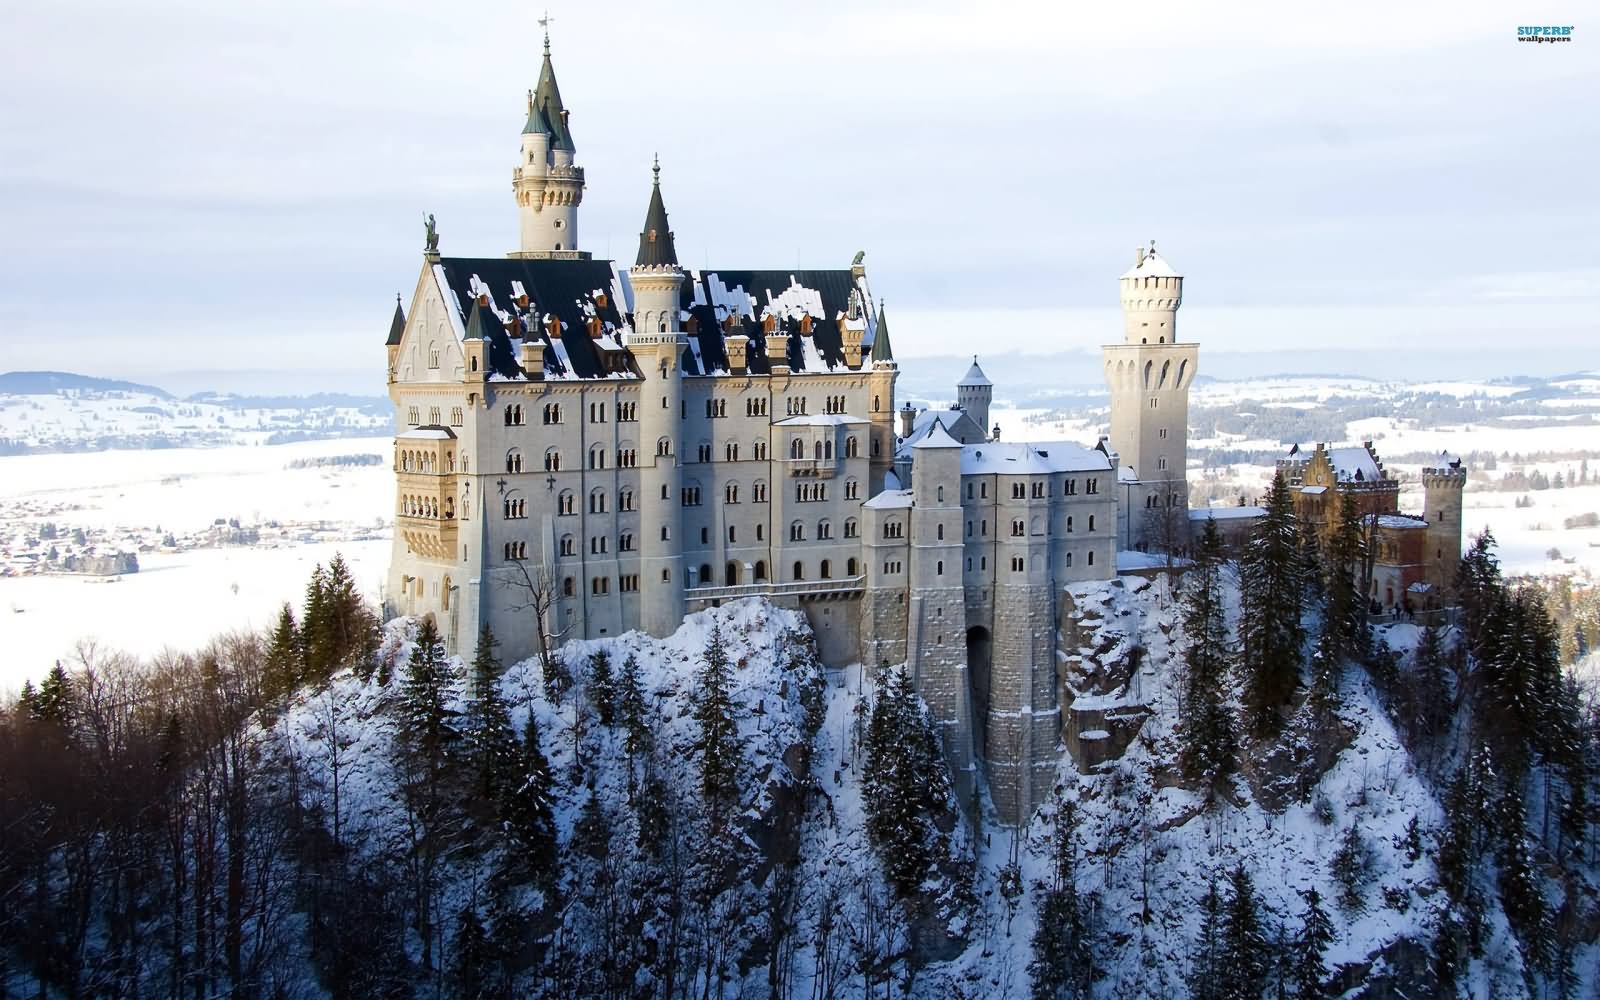 The Neuschwanstein Castle Covered With Snow Image